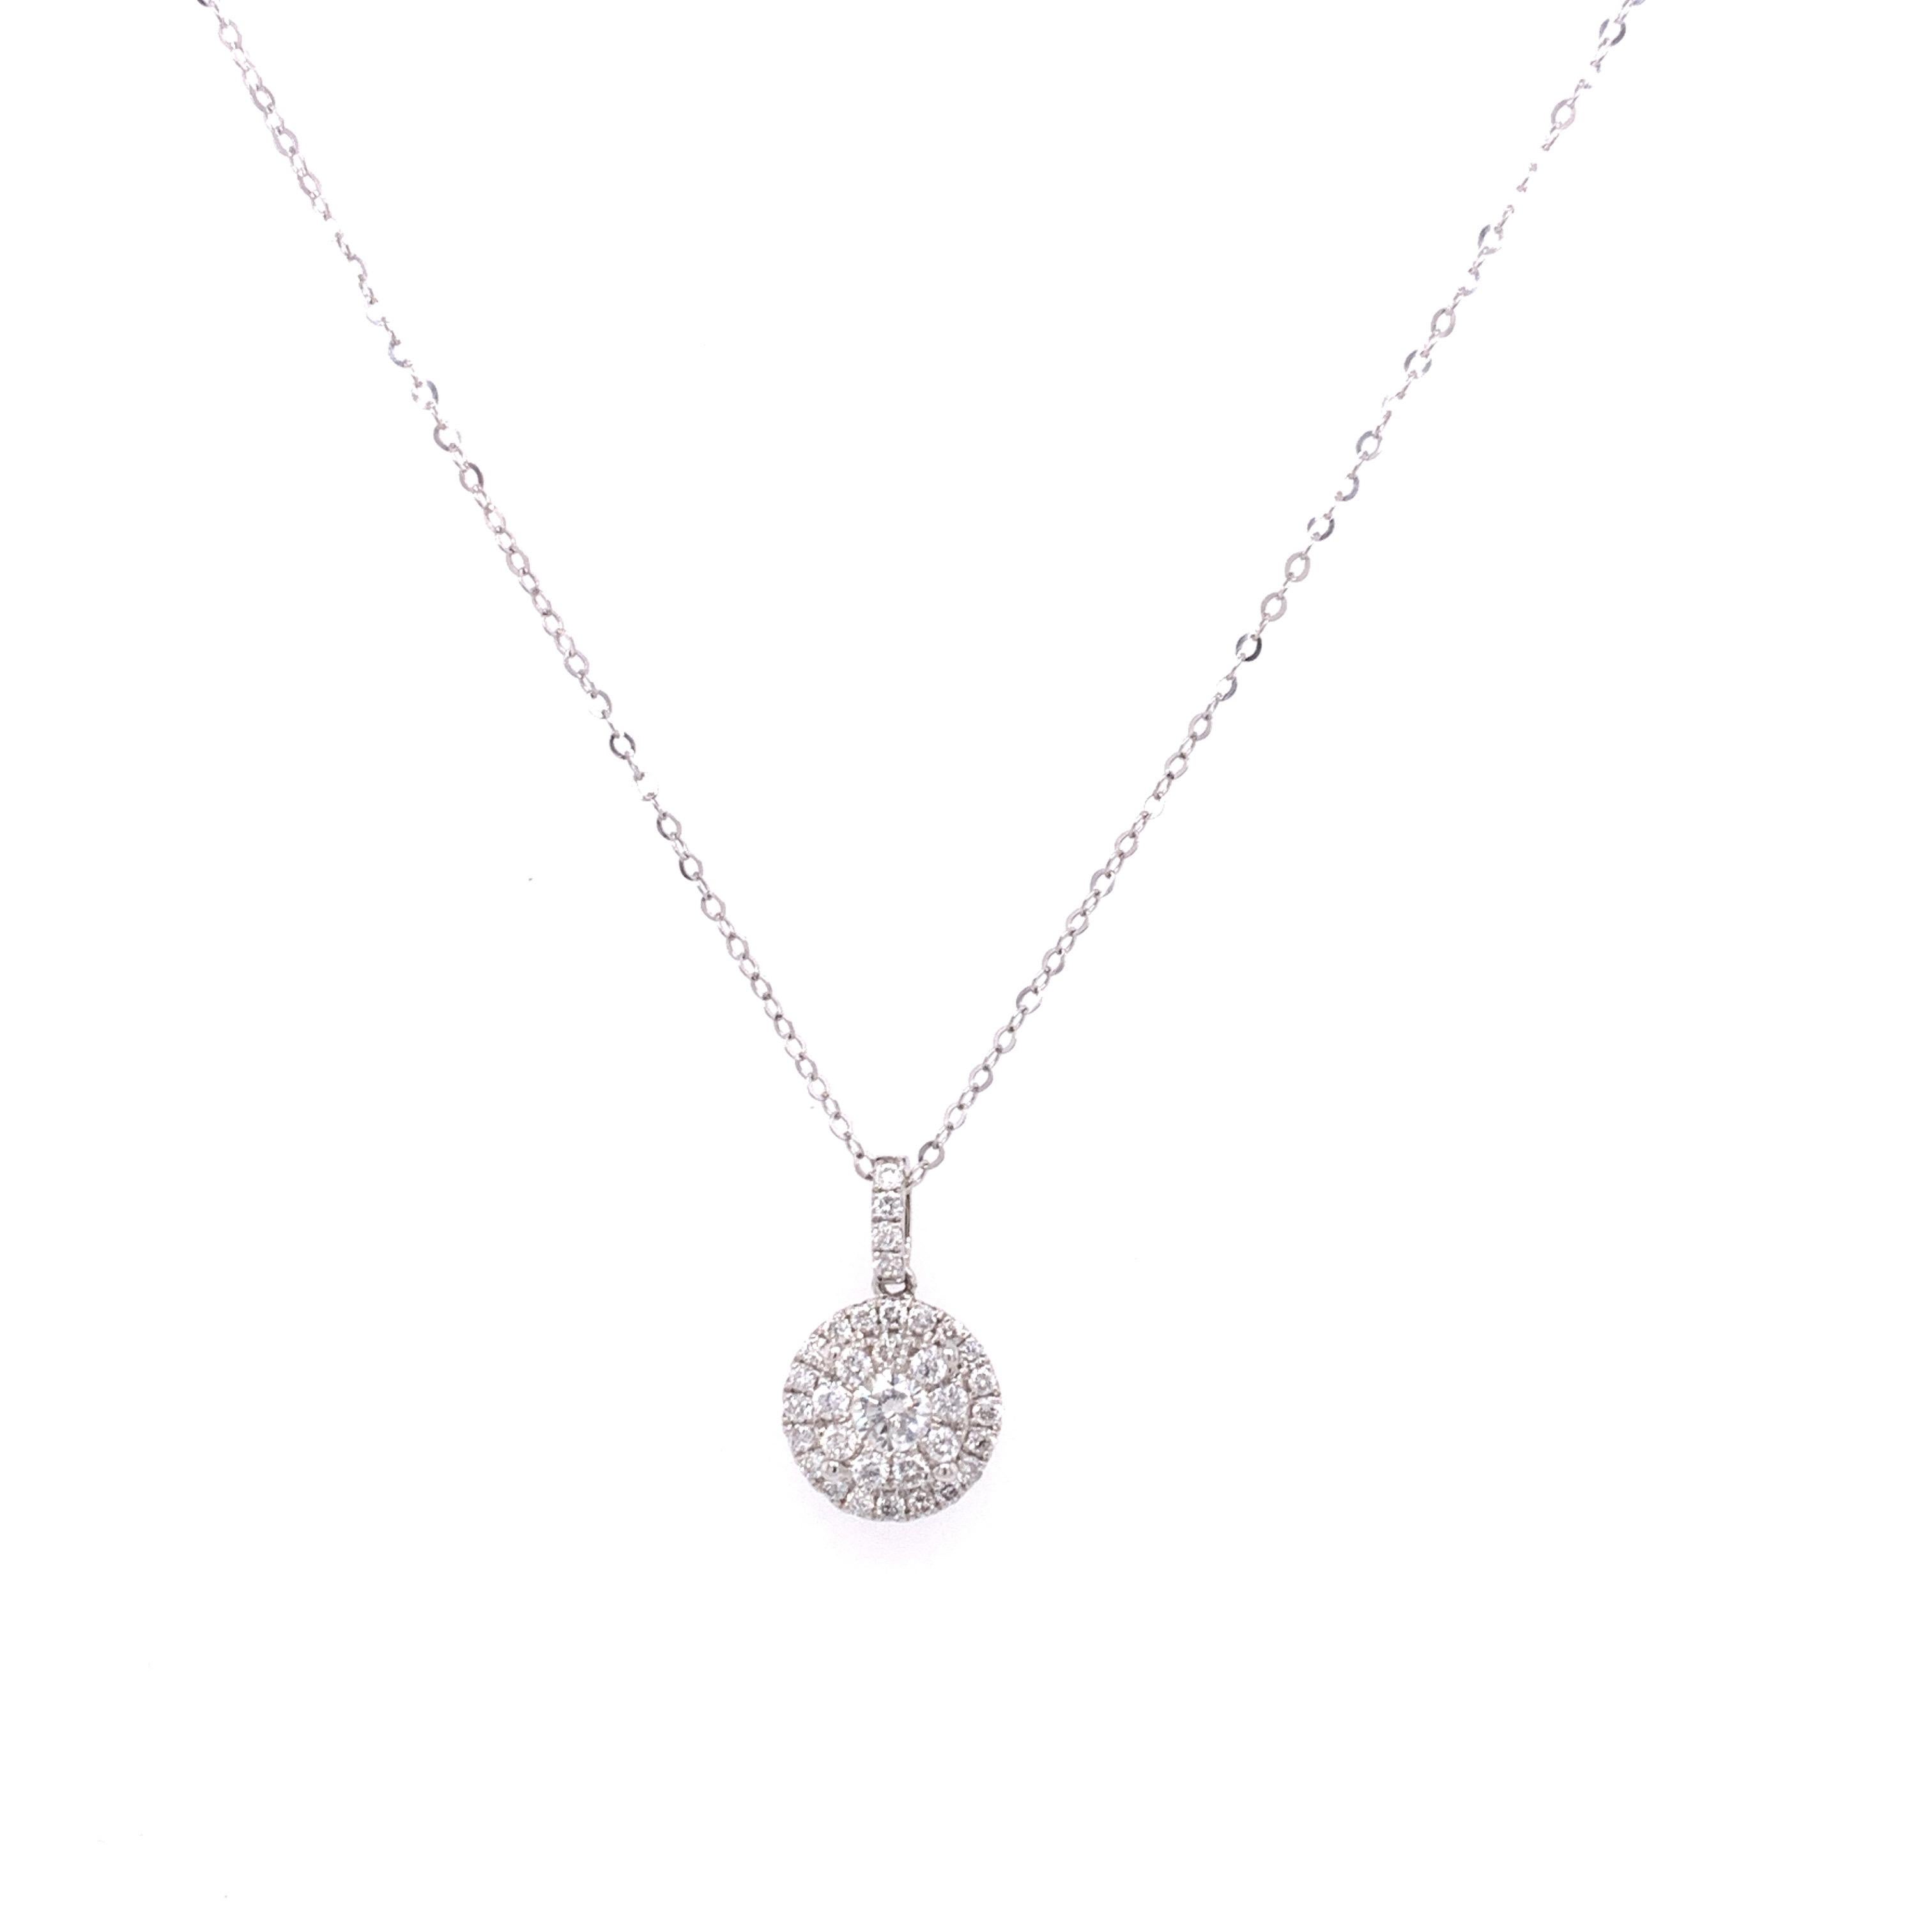 Cluster Diamond Pendant Necklace made with real/natural brilliant cut diamonds. Diamond Weight: 0.49 carats, Diamond Quantity: 34 round diamonds. Mounted on 14 karat white gold, two setting adjustable chain.